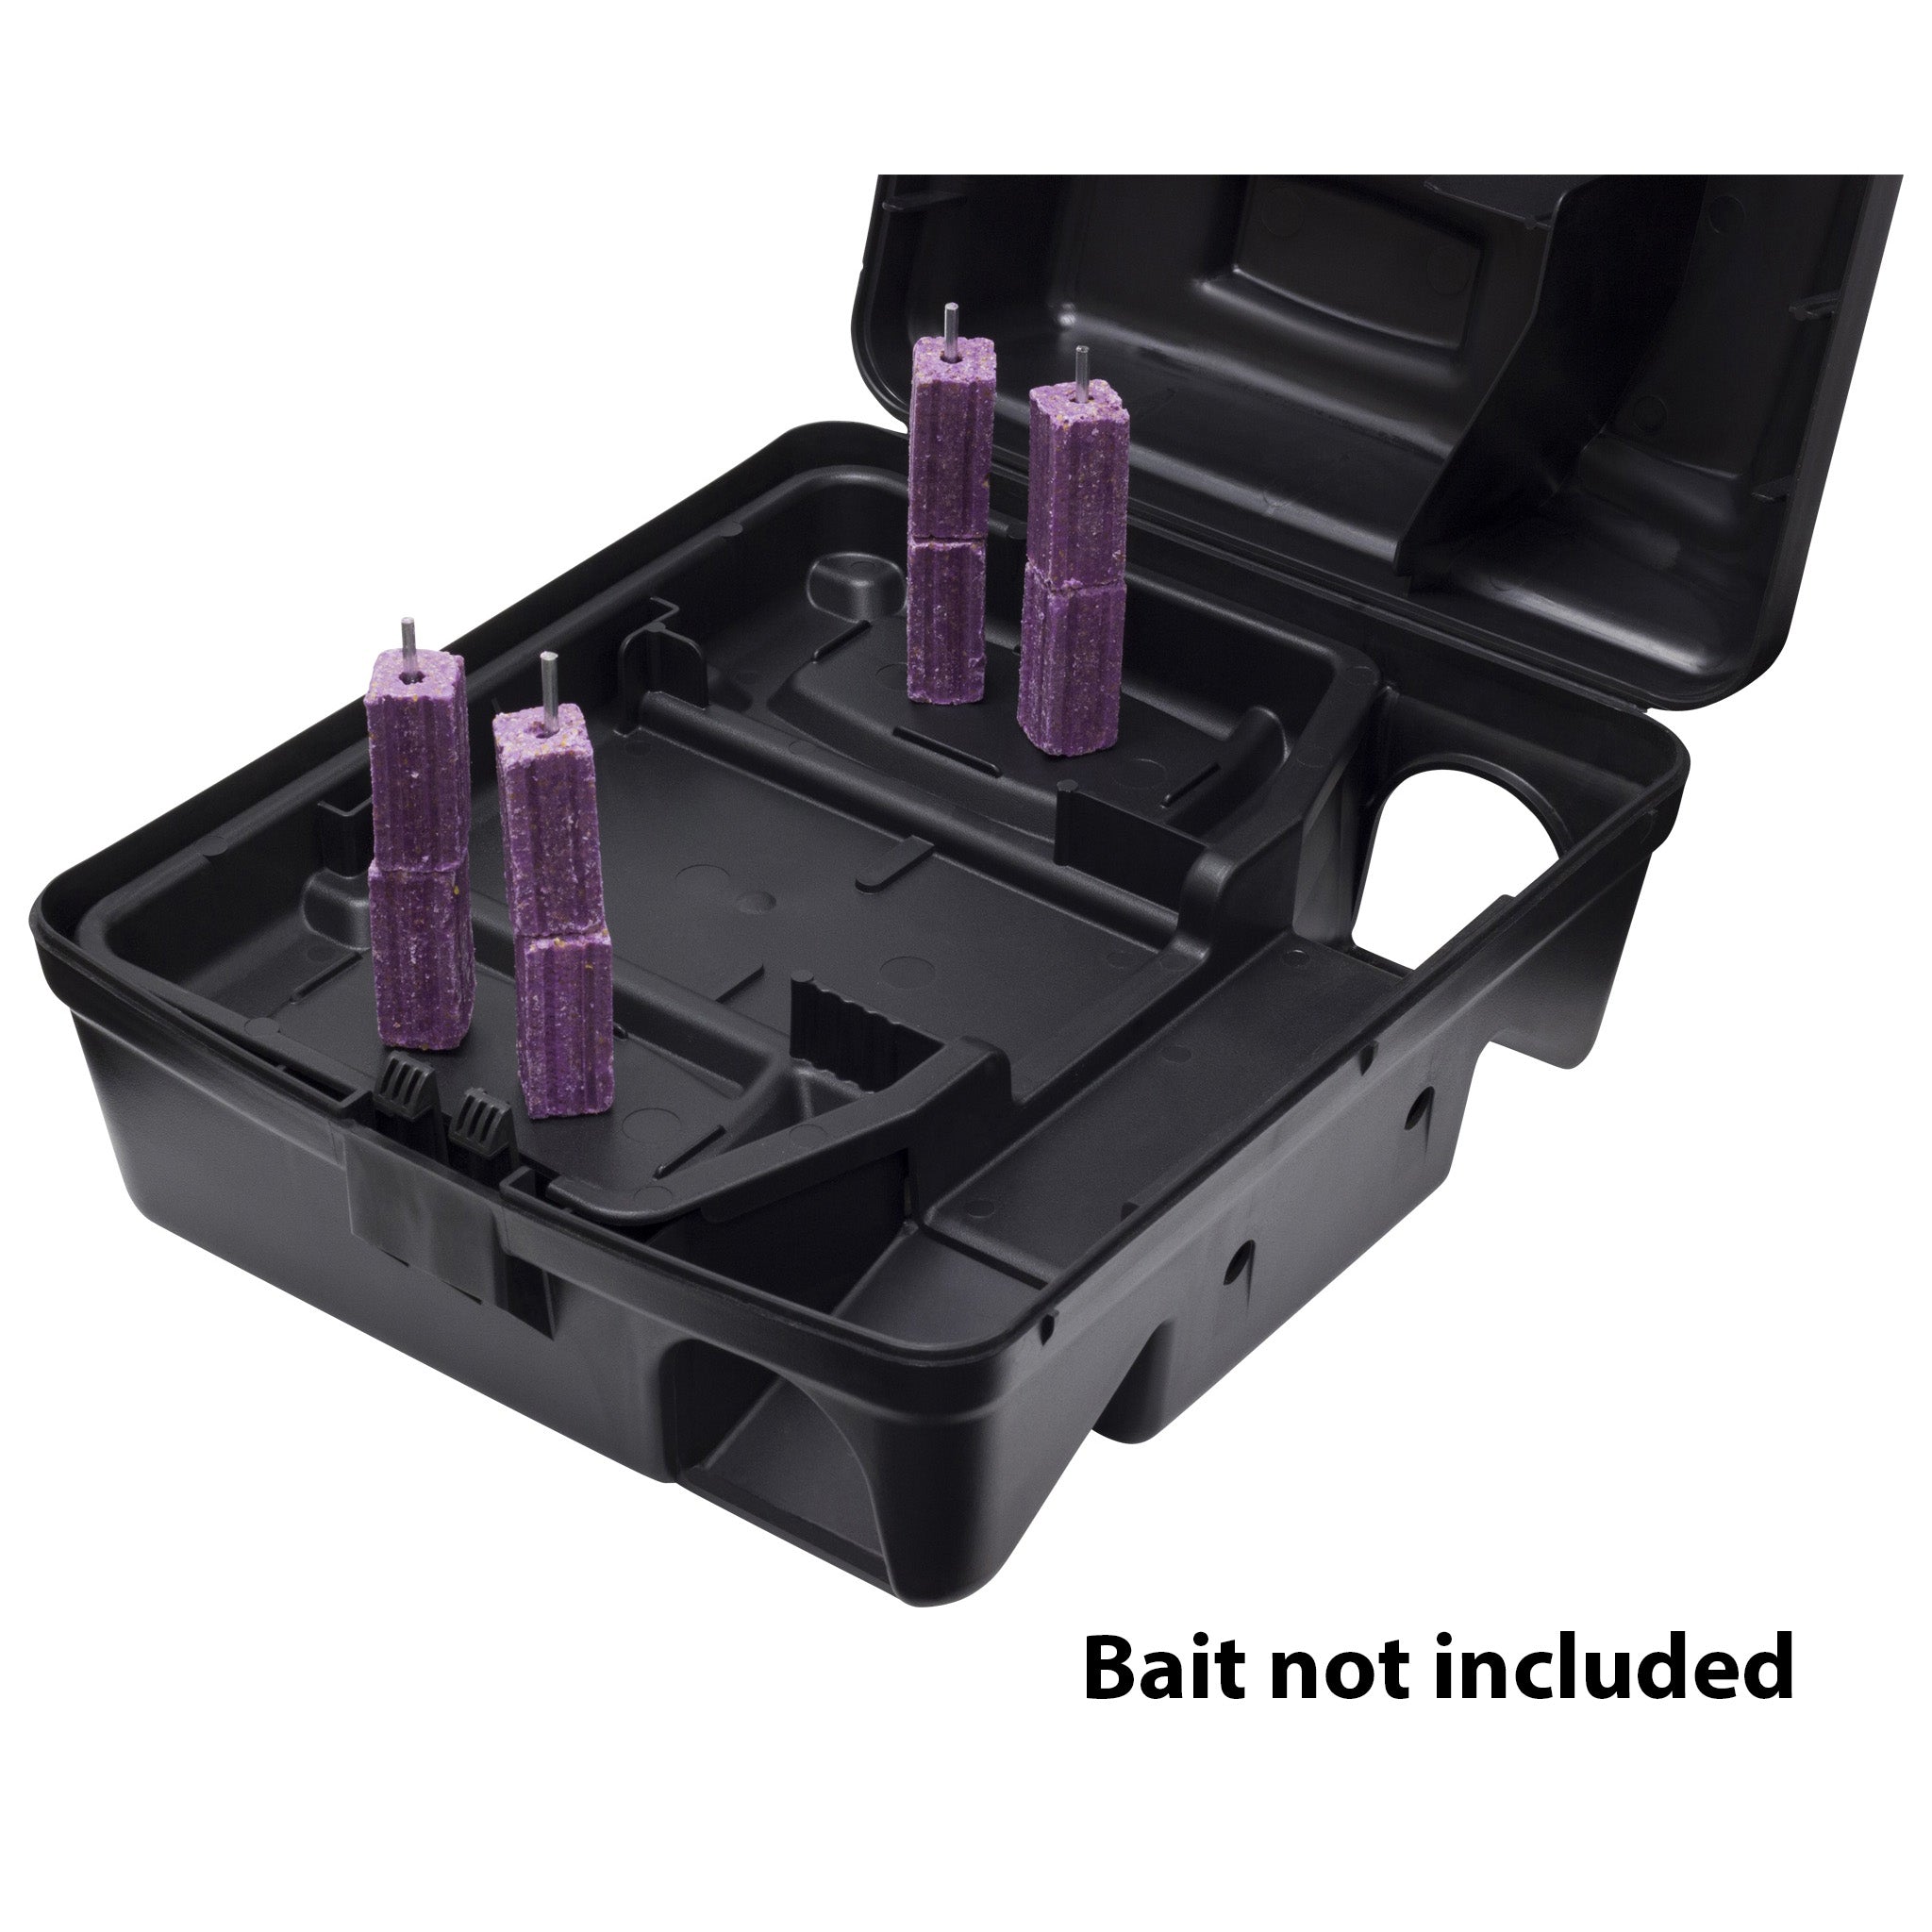 Weighted Rat Bait Station – Advantage Pest Control